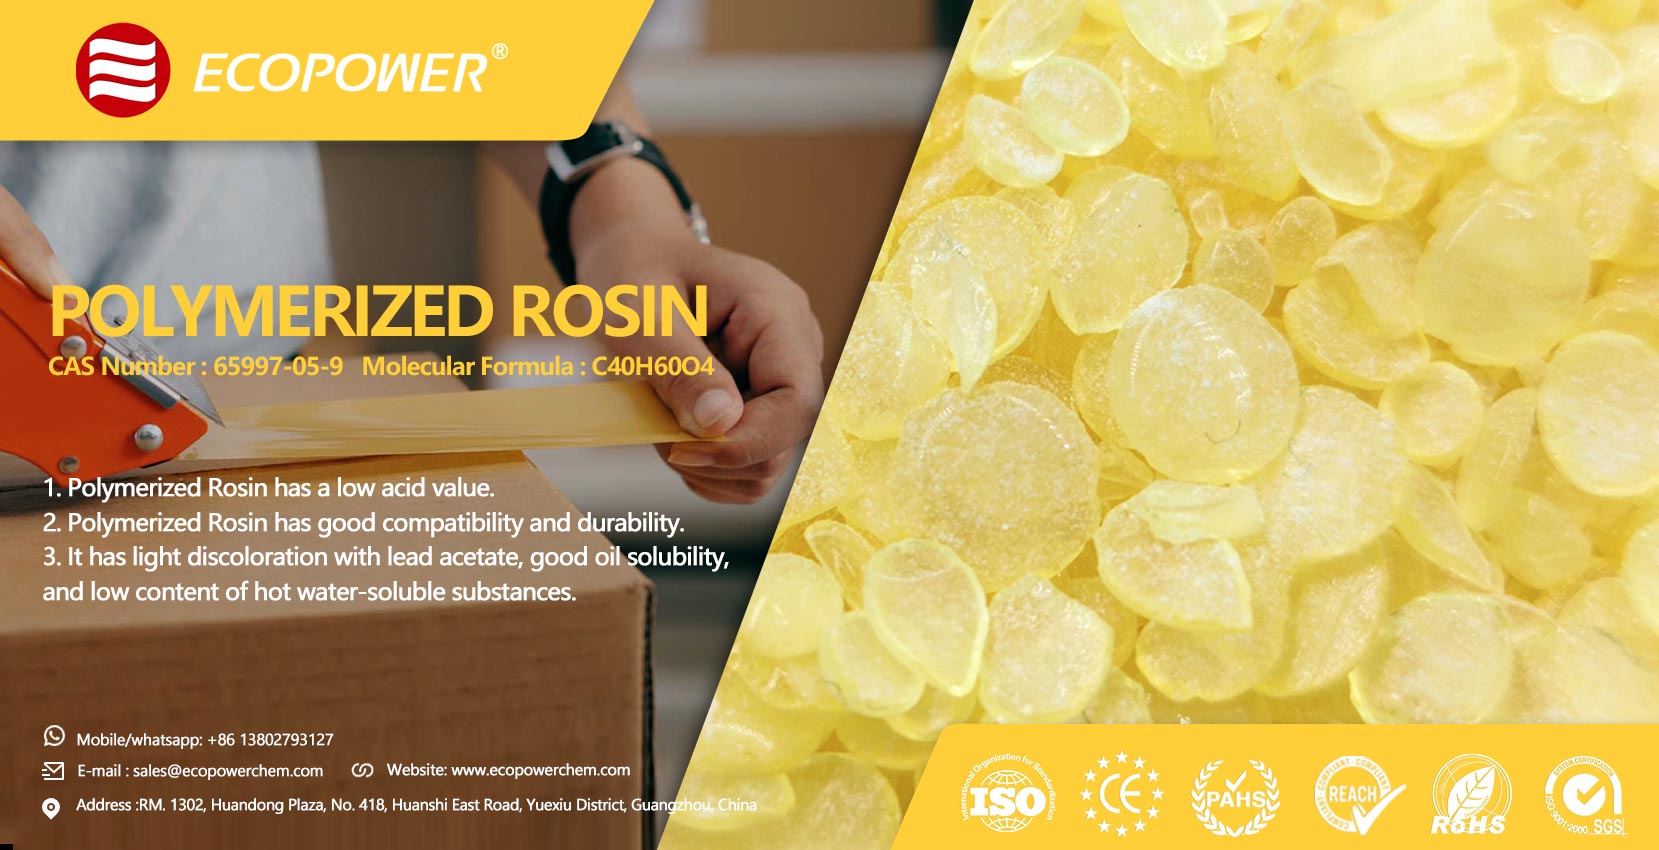 Introduction to the Characteristics and Uses of Polymerized Rosin